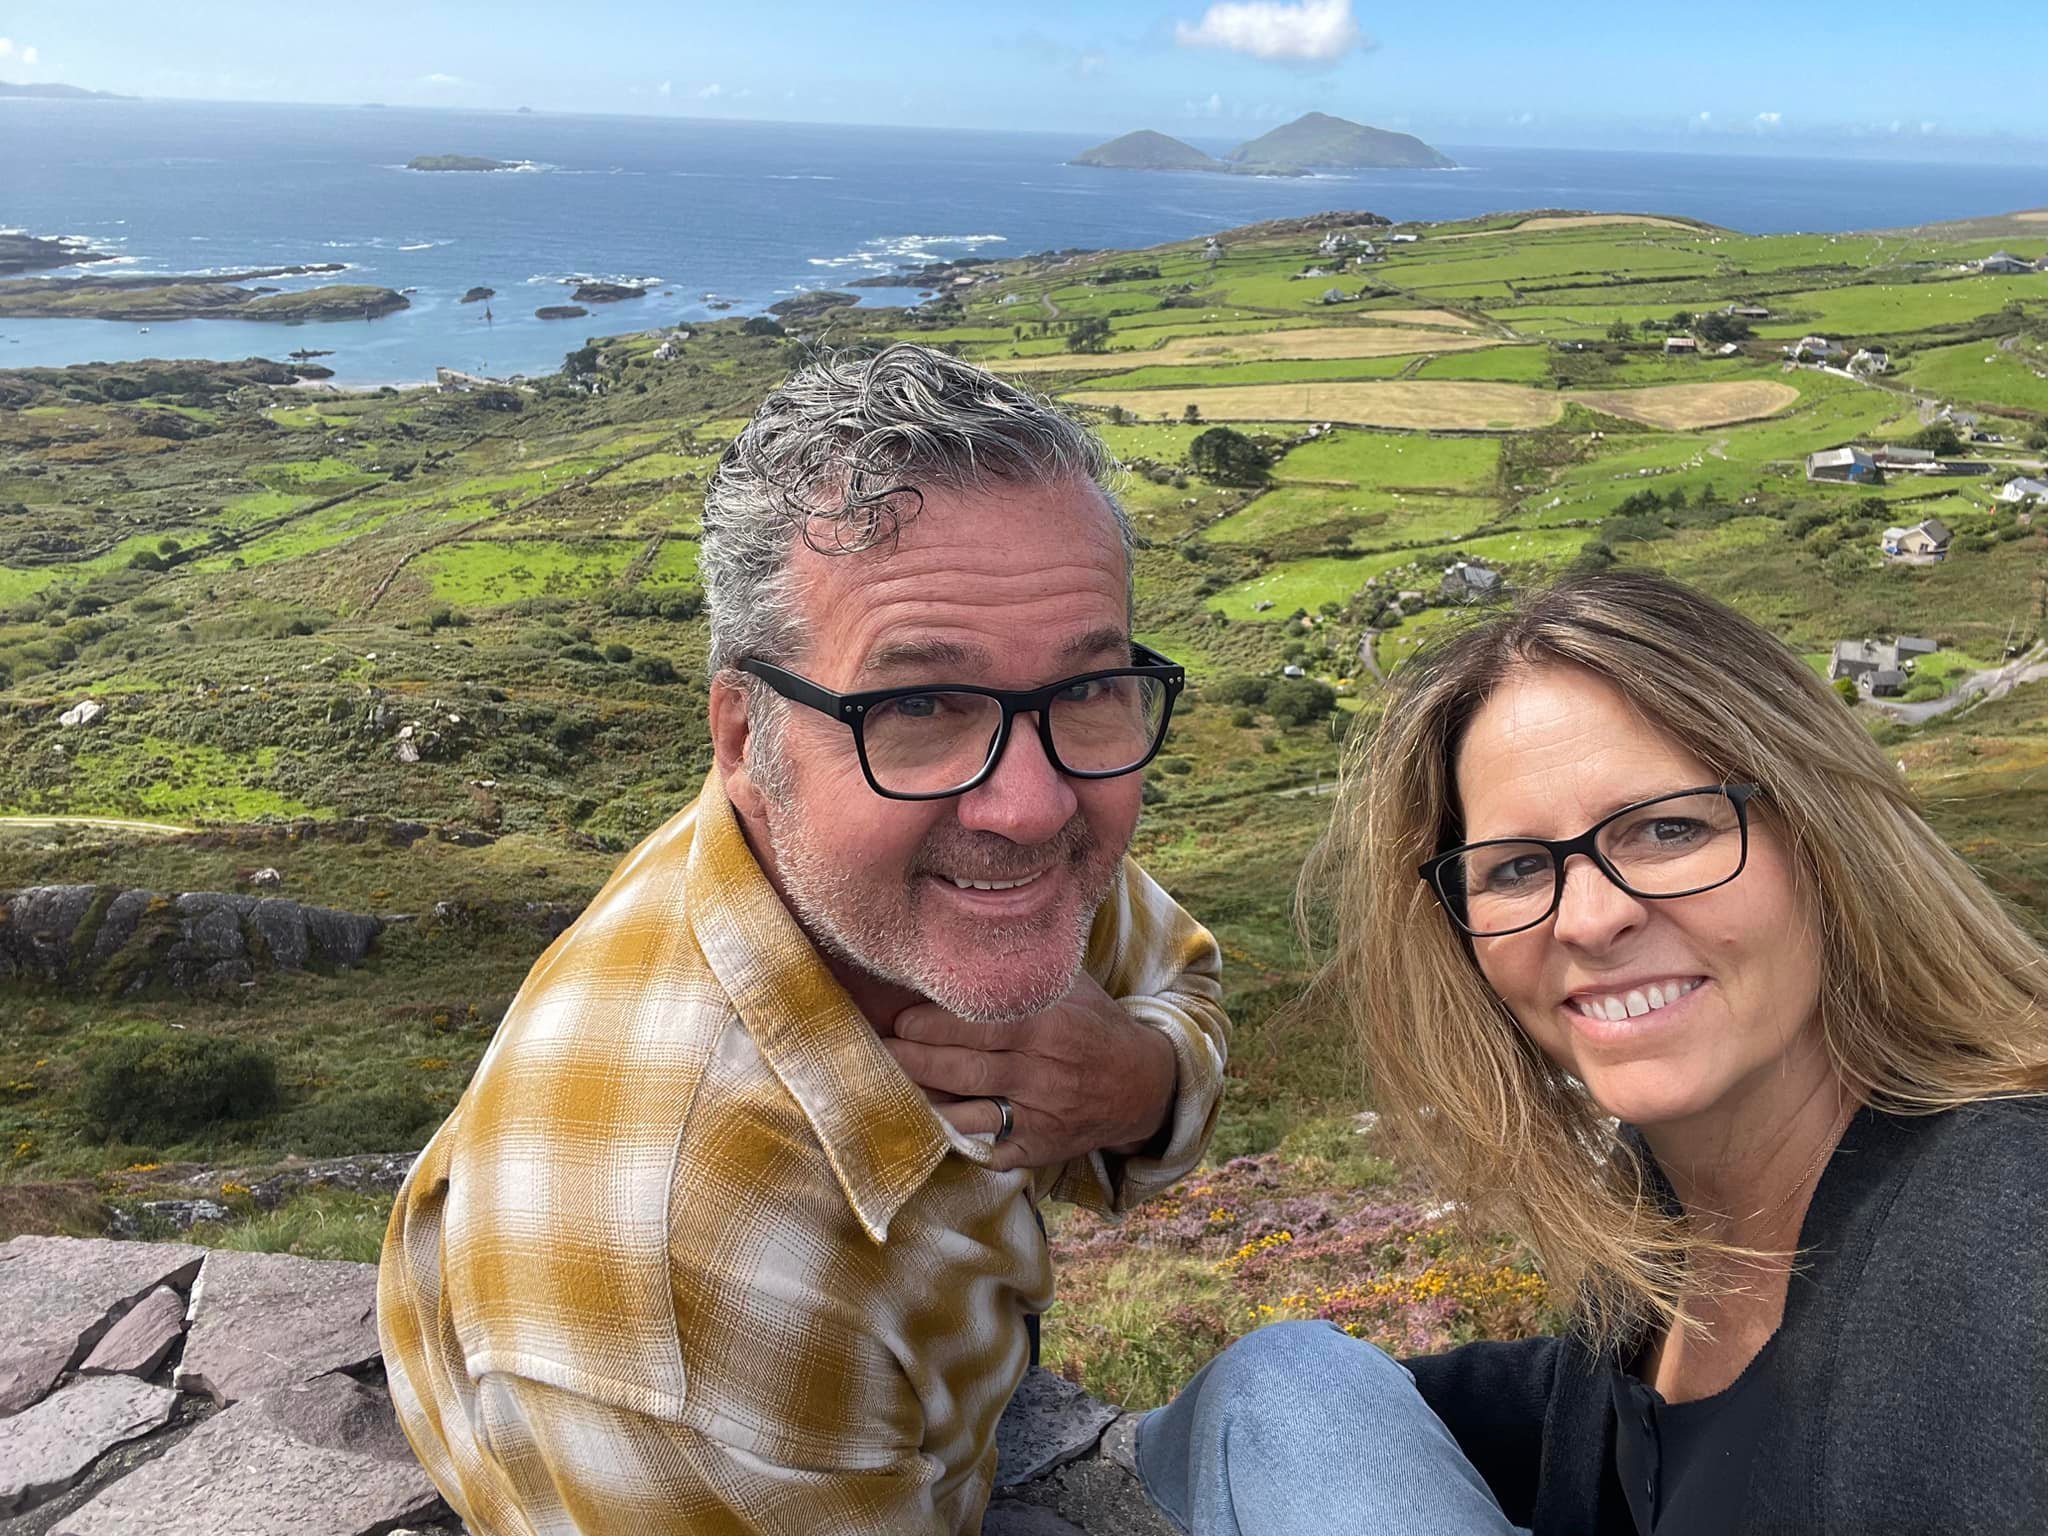 Dublin to the Ring of Kerry and up the west coast of Ireland with my best friend.